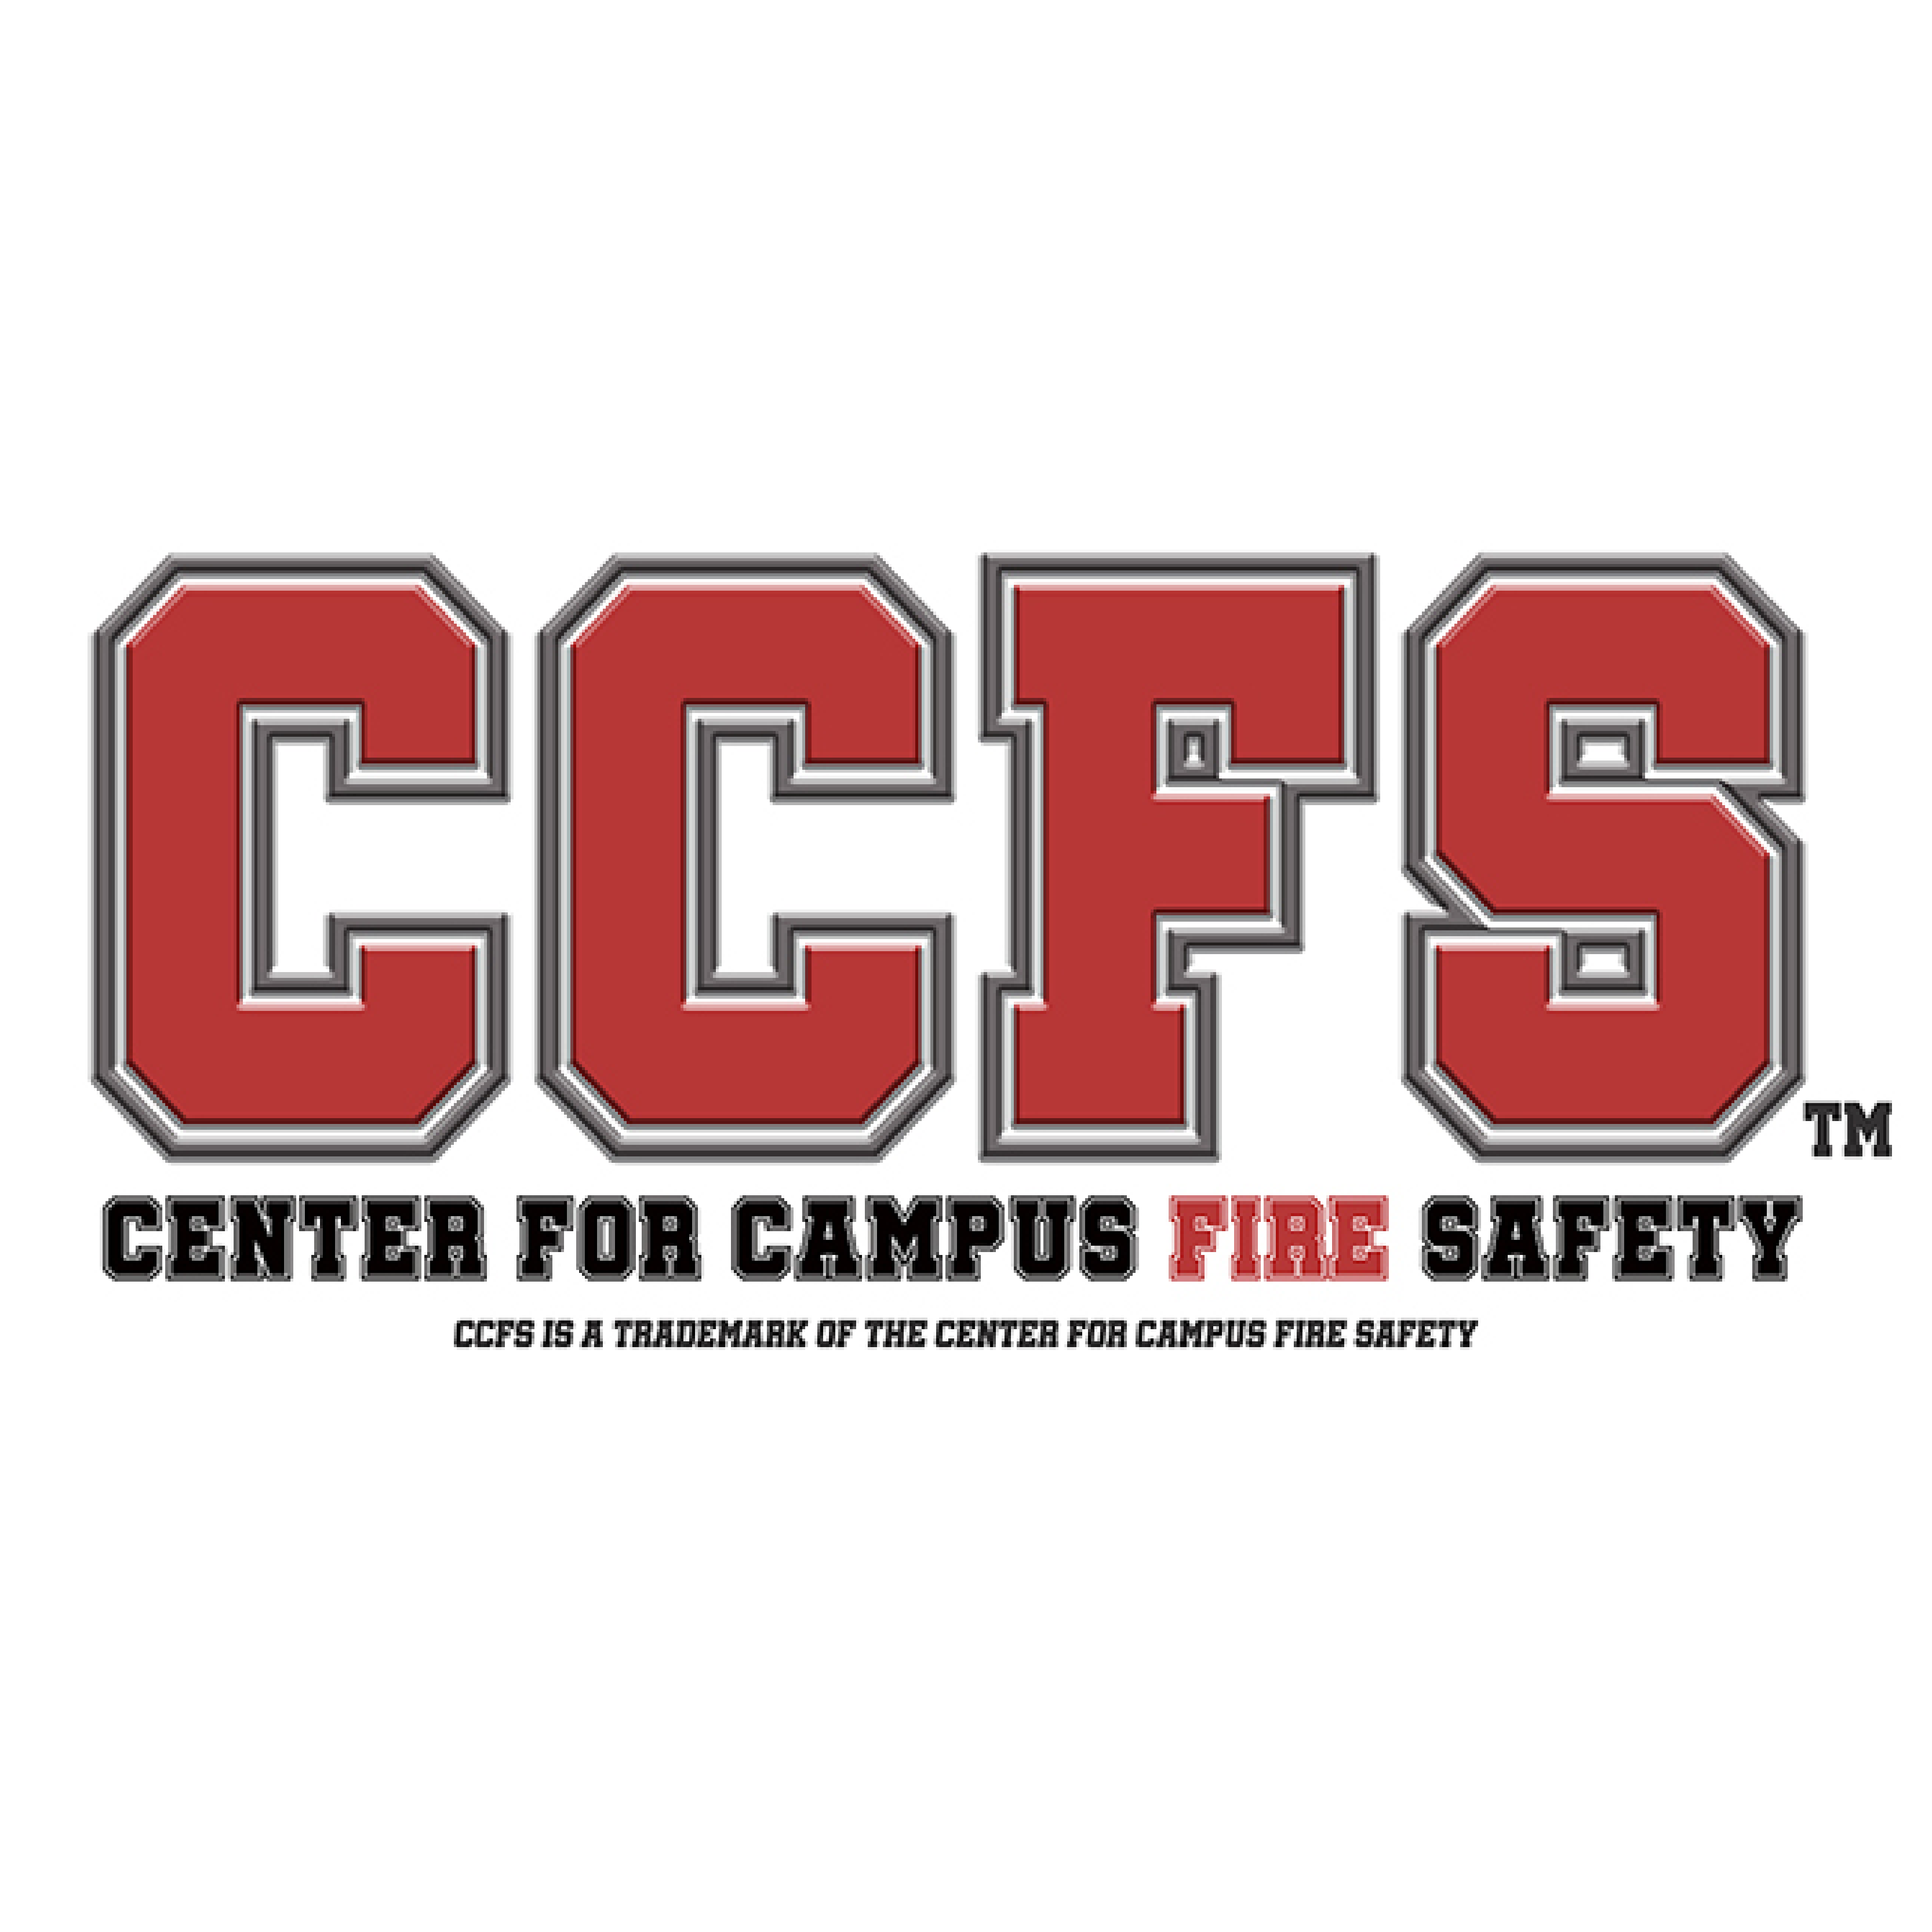 Center for Campus Fire Safety logo